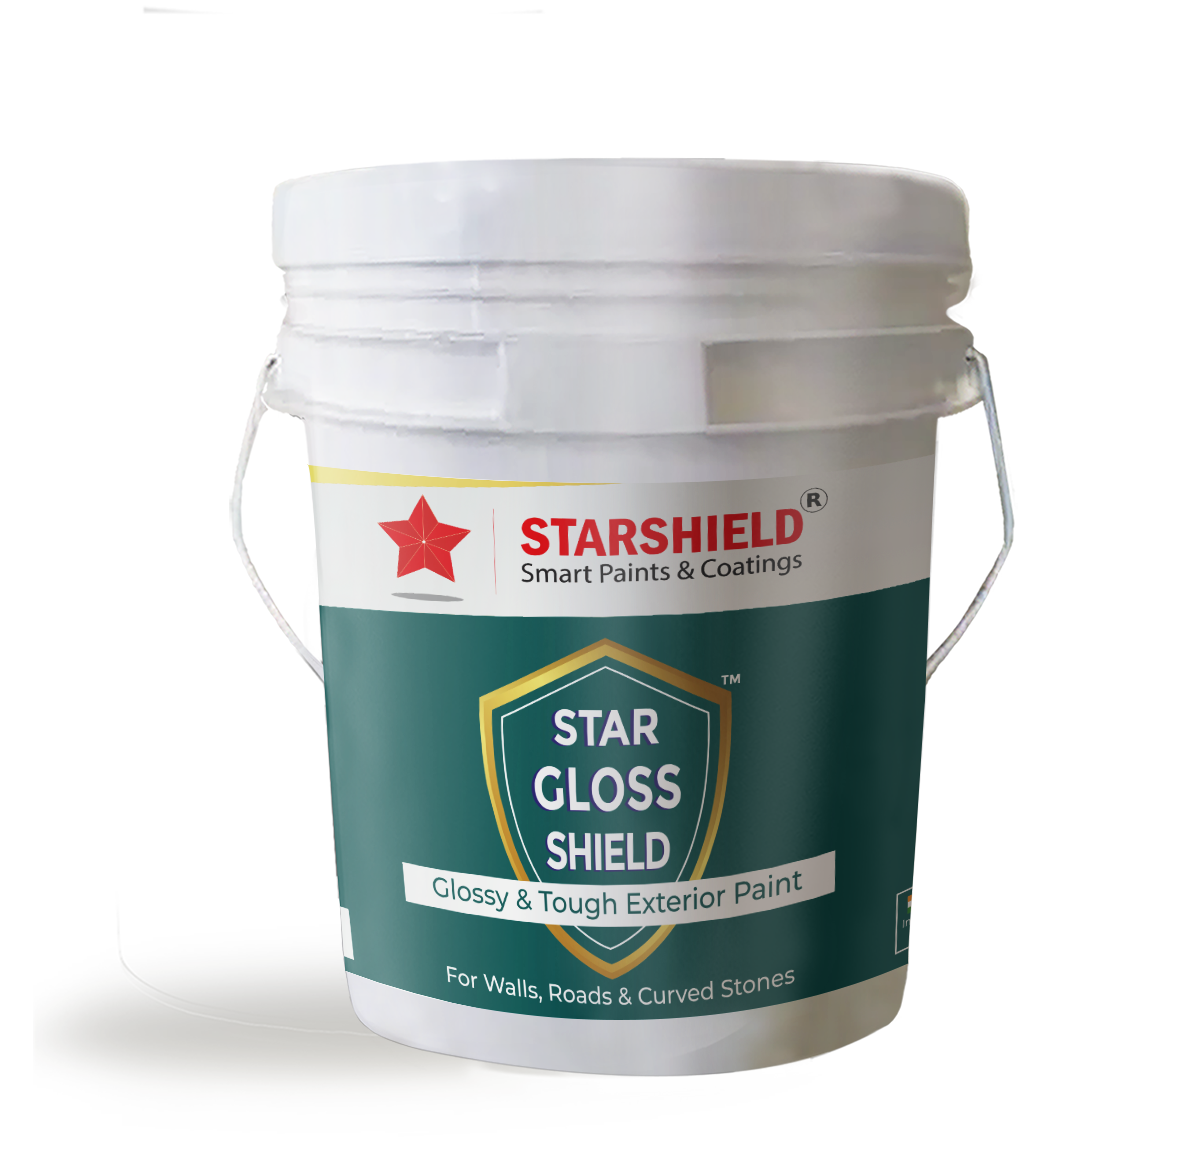  Experience enduring glossy finish with Star Gloss Shield: Repels dust, and water, extends wood life.